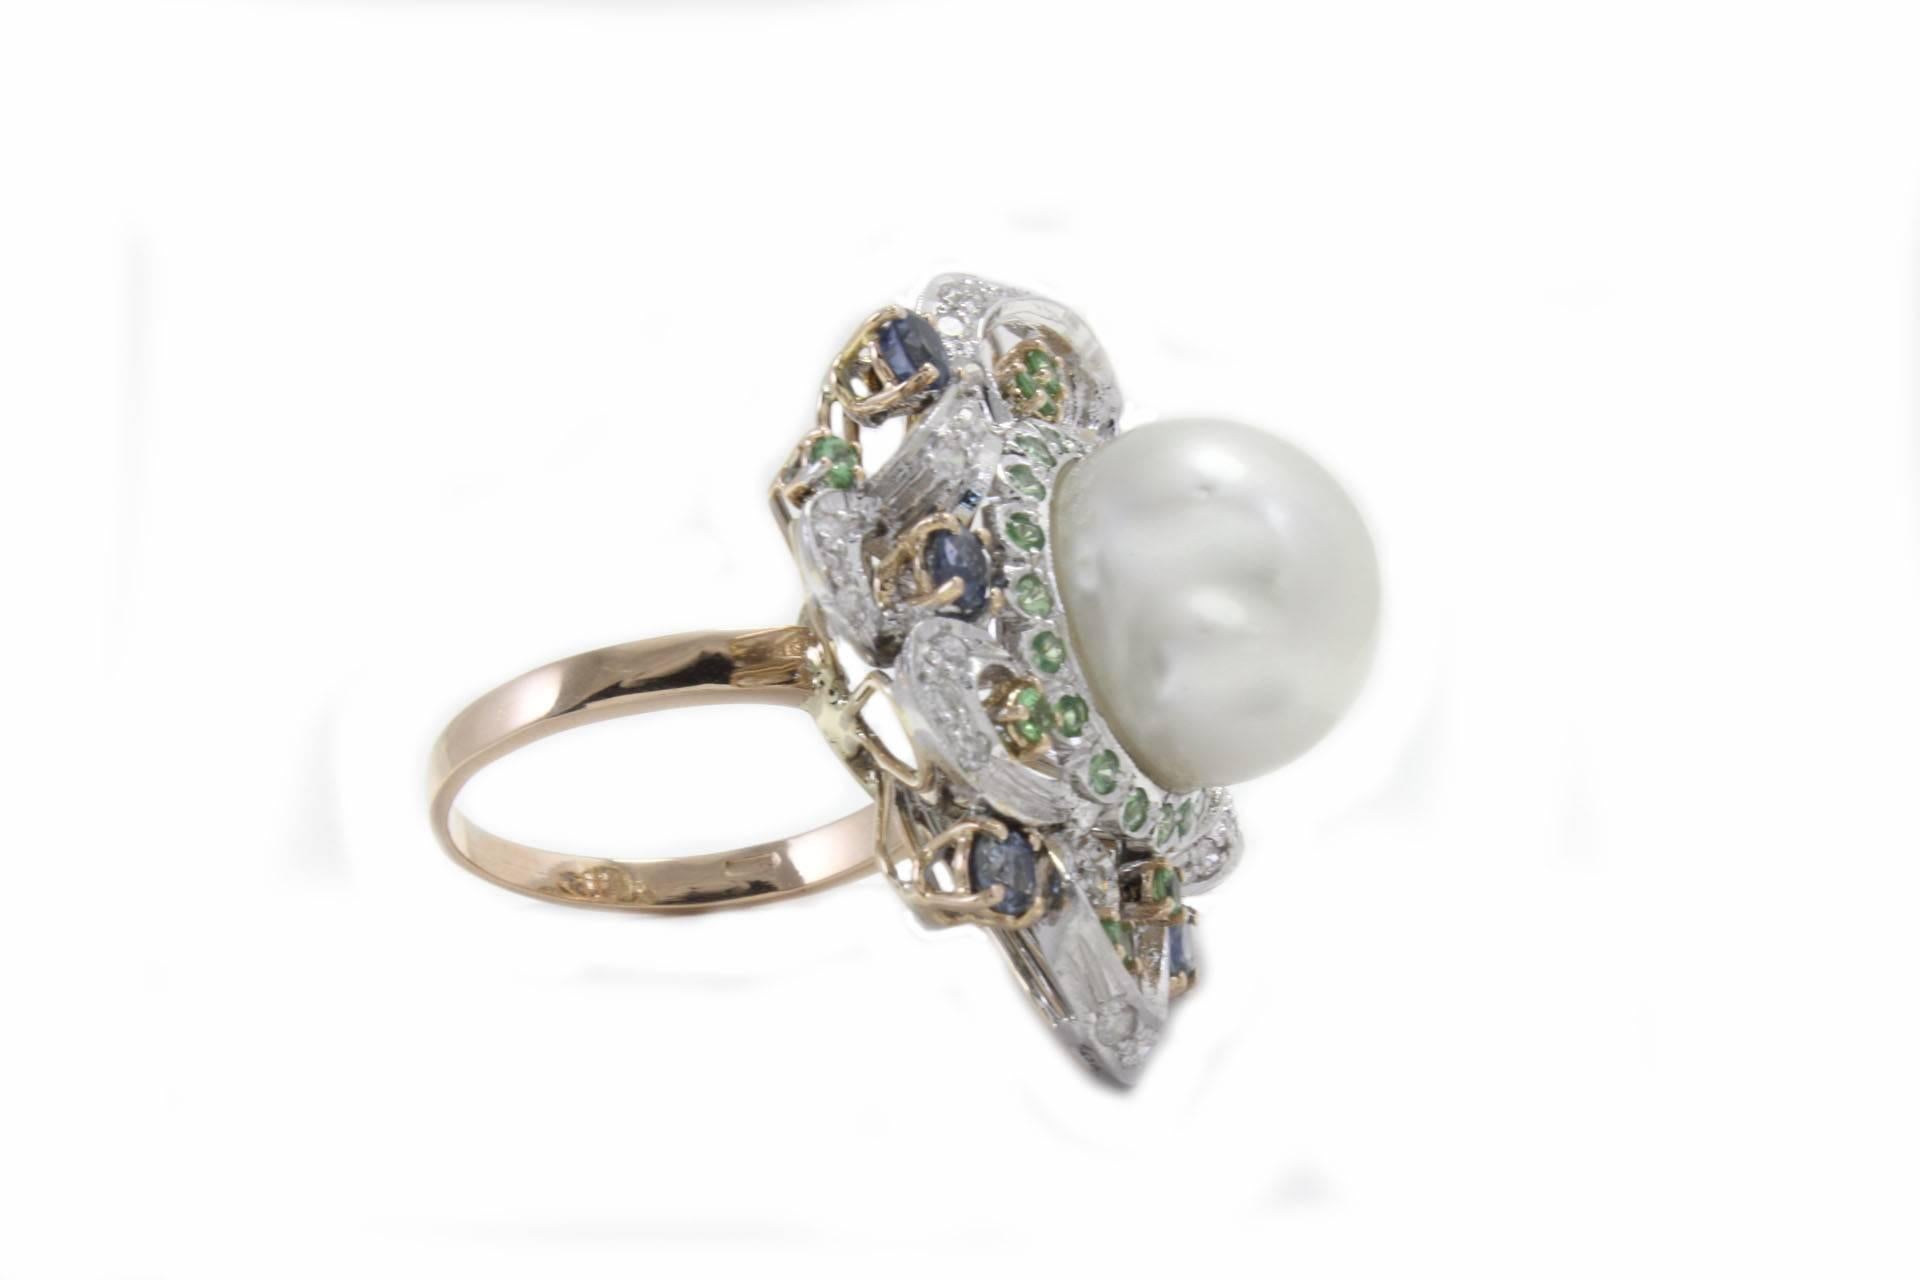 Charming fashion ring, mounted in 14Kt white gold, with details in 14 Kt yellow gold the cluster of tsavorite, diamonds and blue sapphires are surrounding a natural pearl.
Ring Size: Ita 18 - French 58 - US 8 - UK Q
Tot weight 17 gr
Diamonds0.63